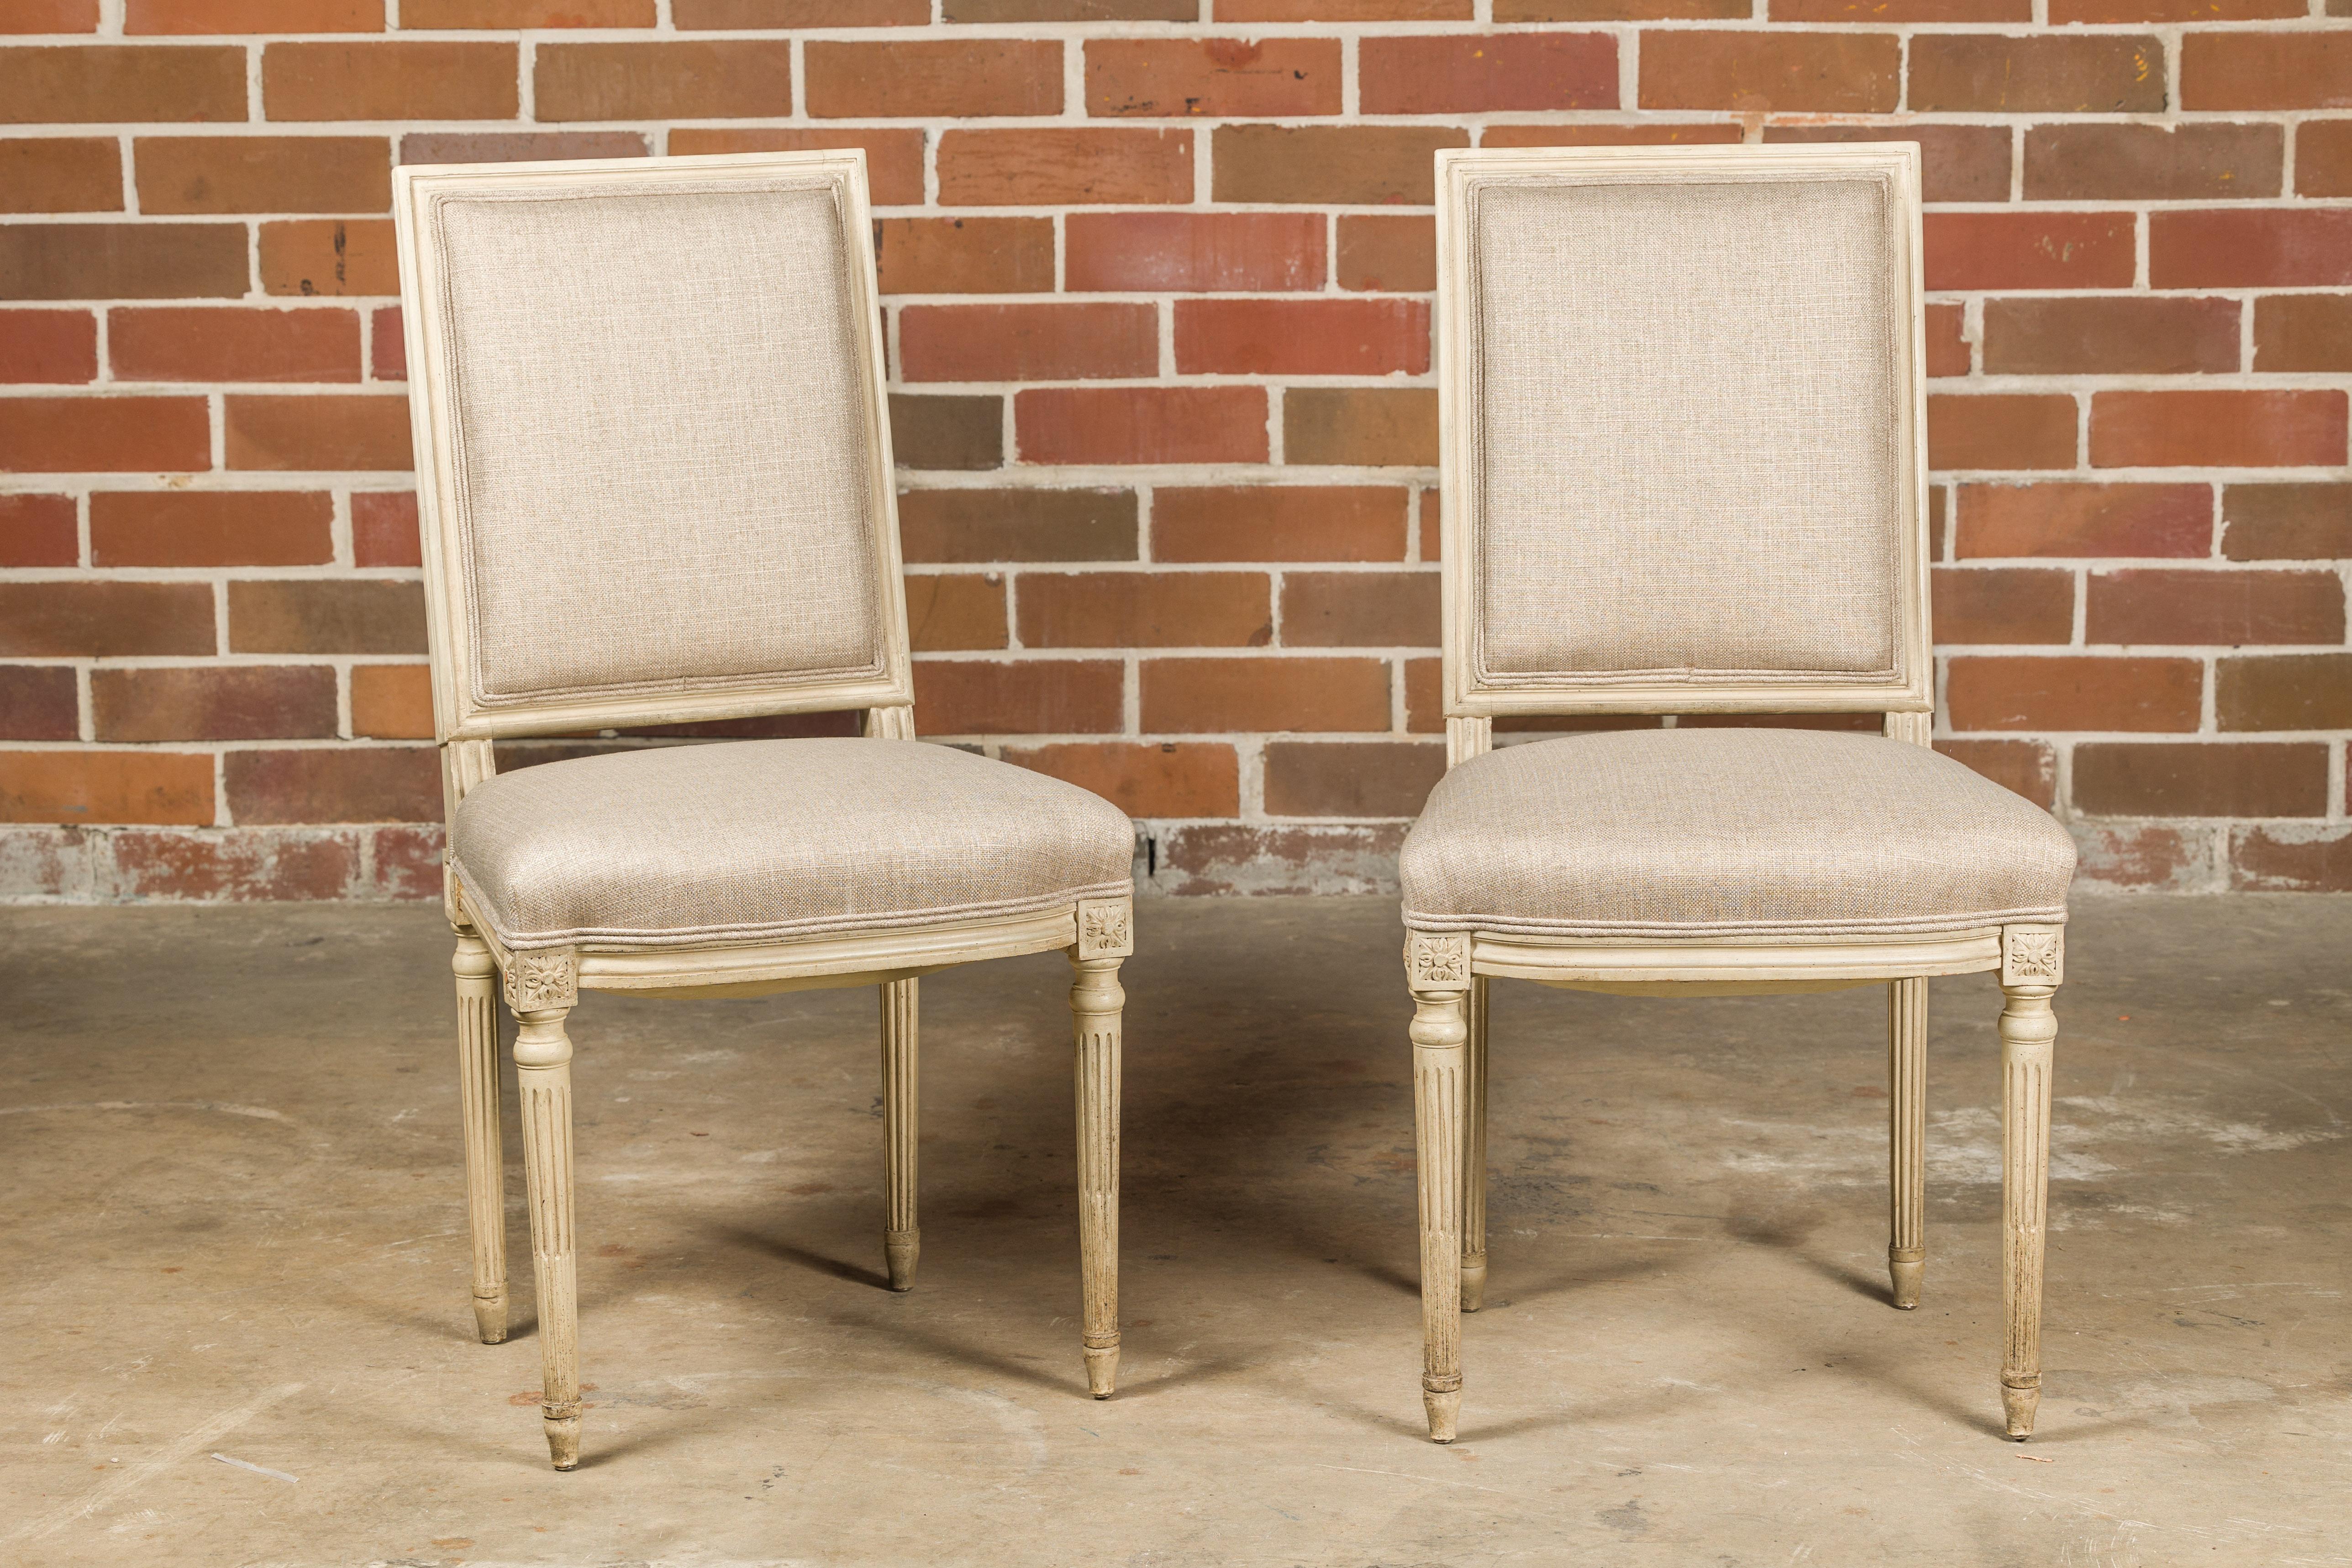 A pair of French Louis XVI style painted side chairs from circa 1920 with rectangular backs, fluted legs, carved rosettes and linen upholstery. This exquisite pair of French Louis XVI style painted side chairs from circa 1920 exudes timeless